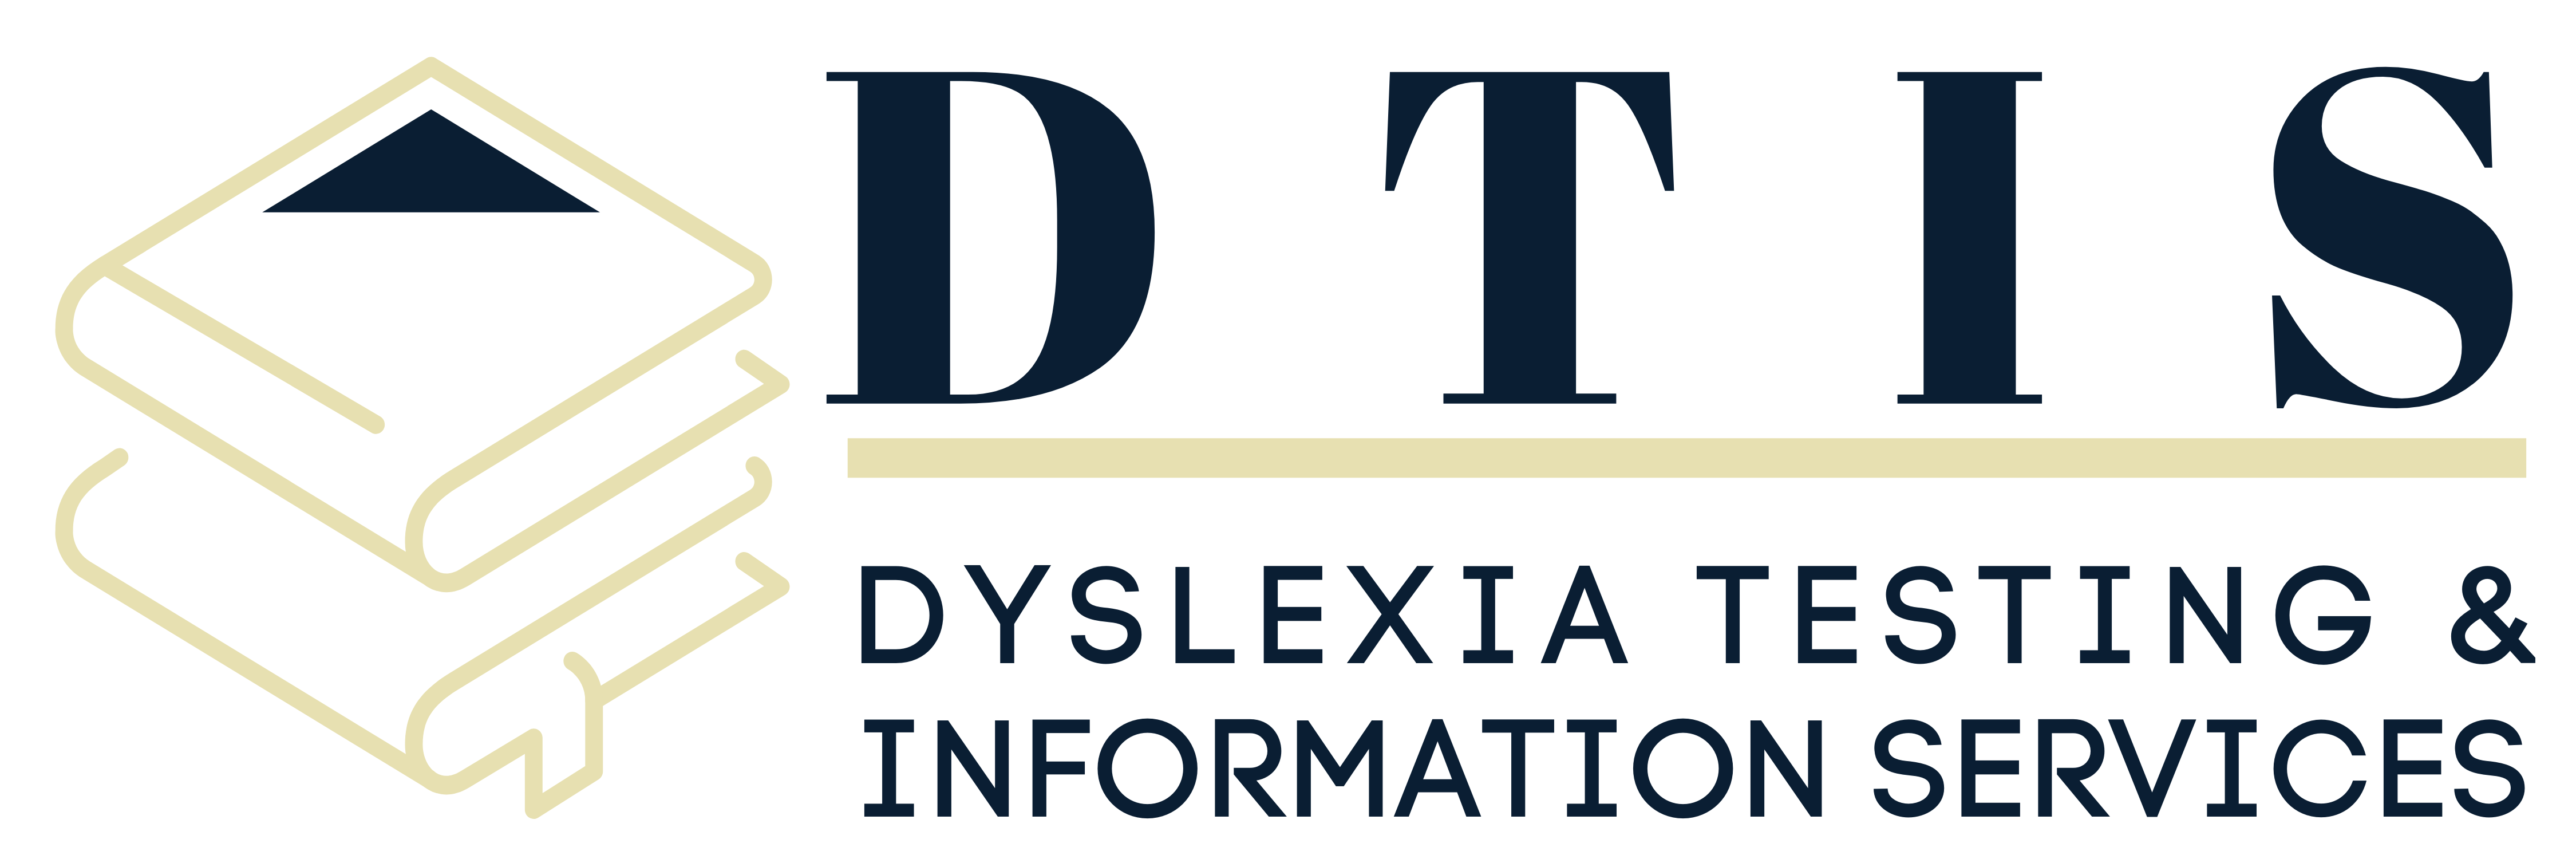 Dyslexia Testing and Information Services